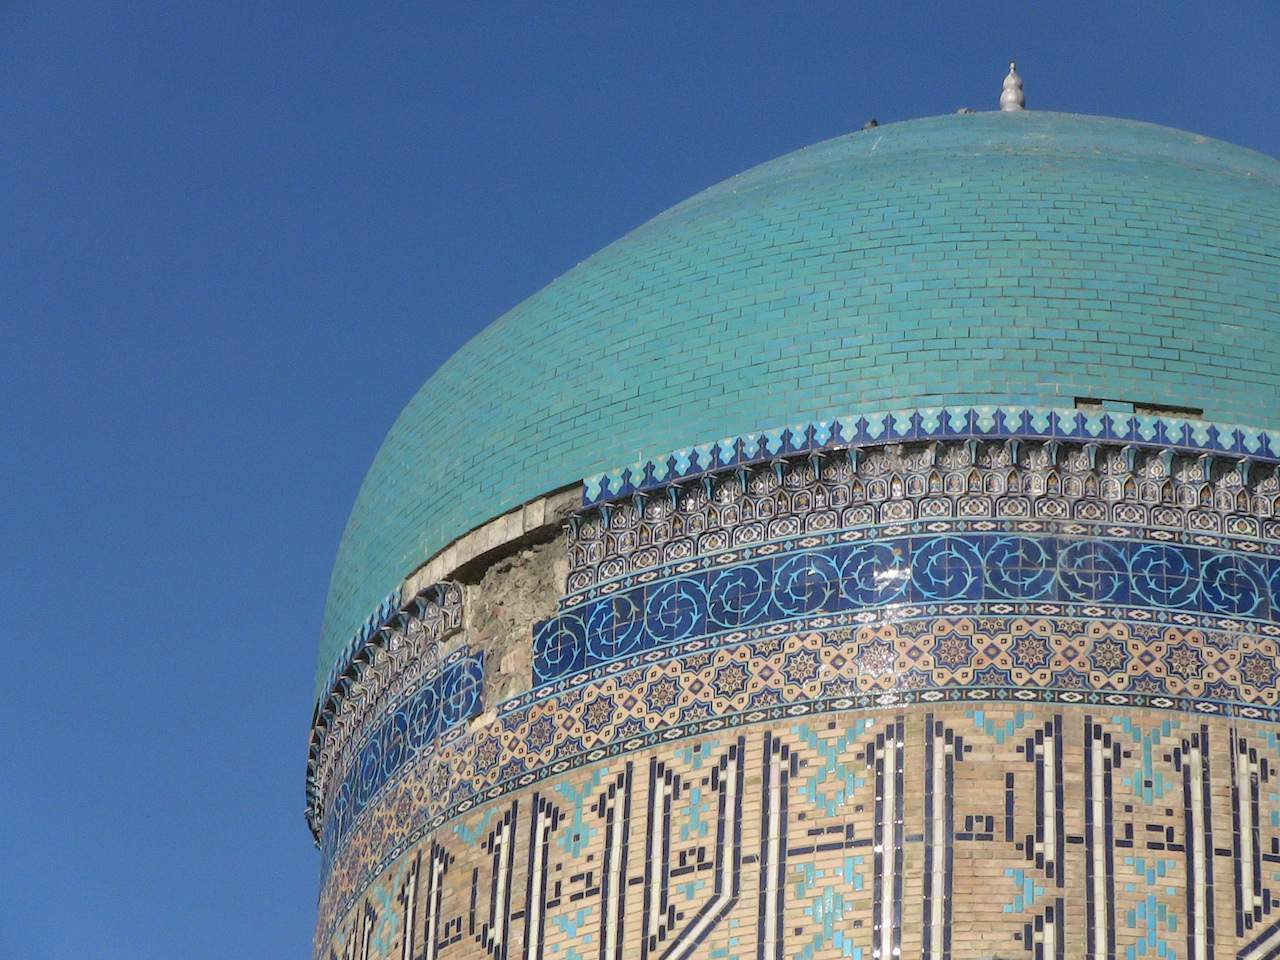 Top 10 things to see and do in Kazakhstan